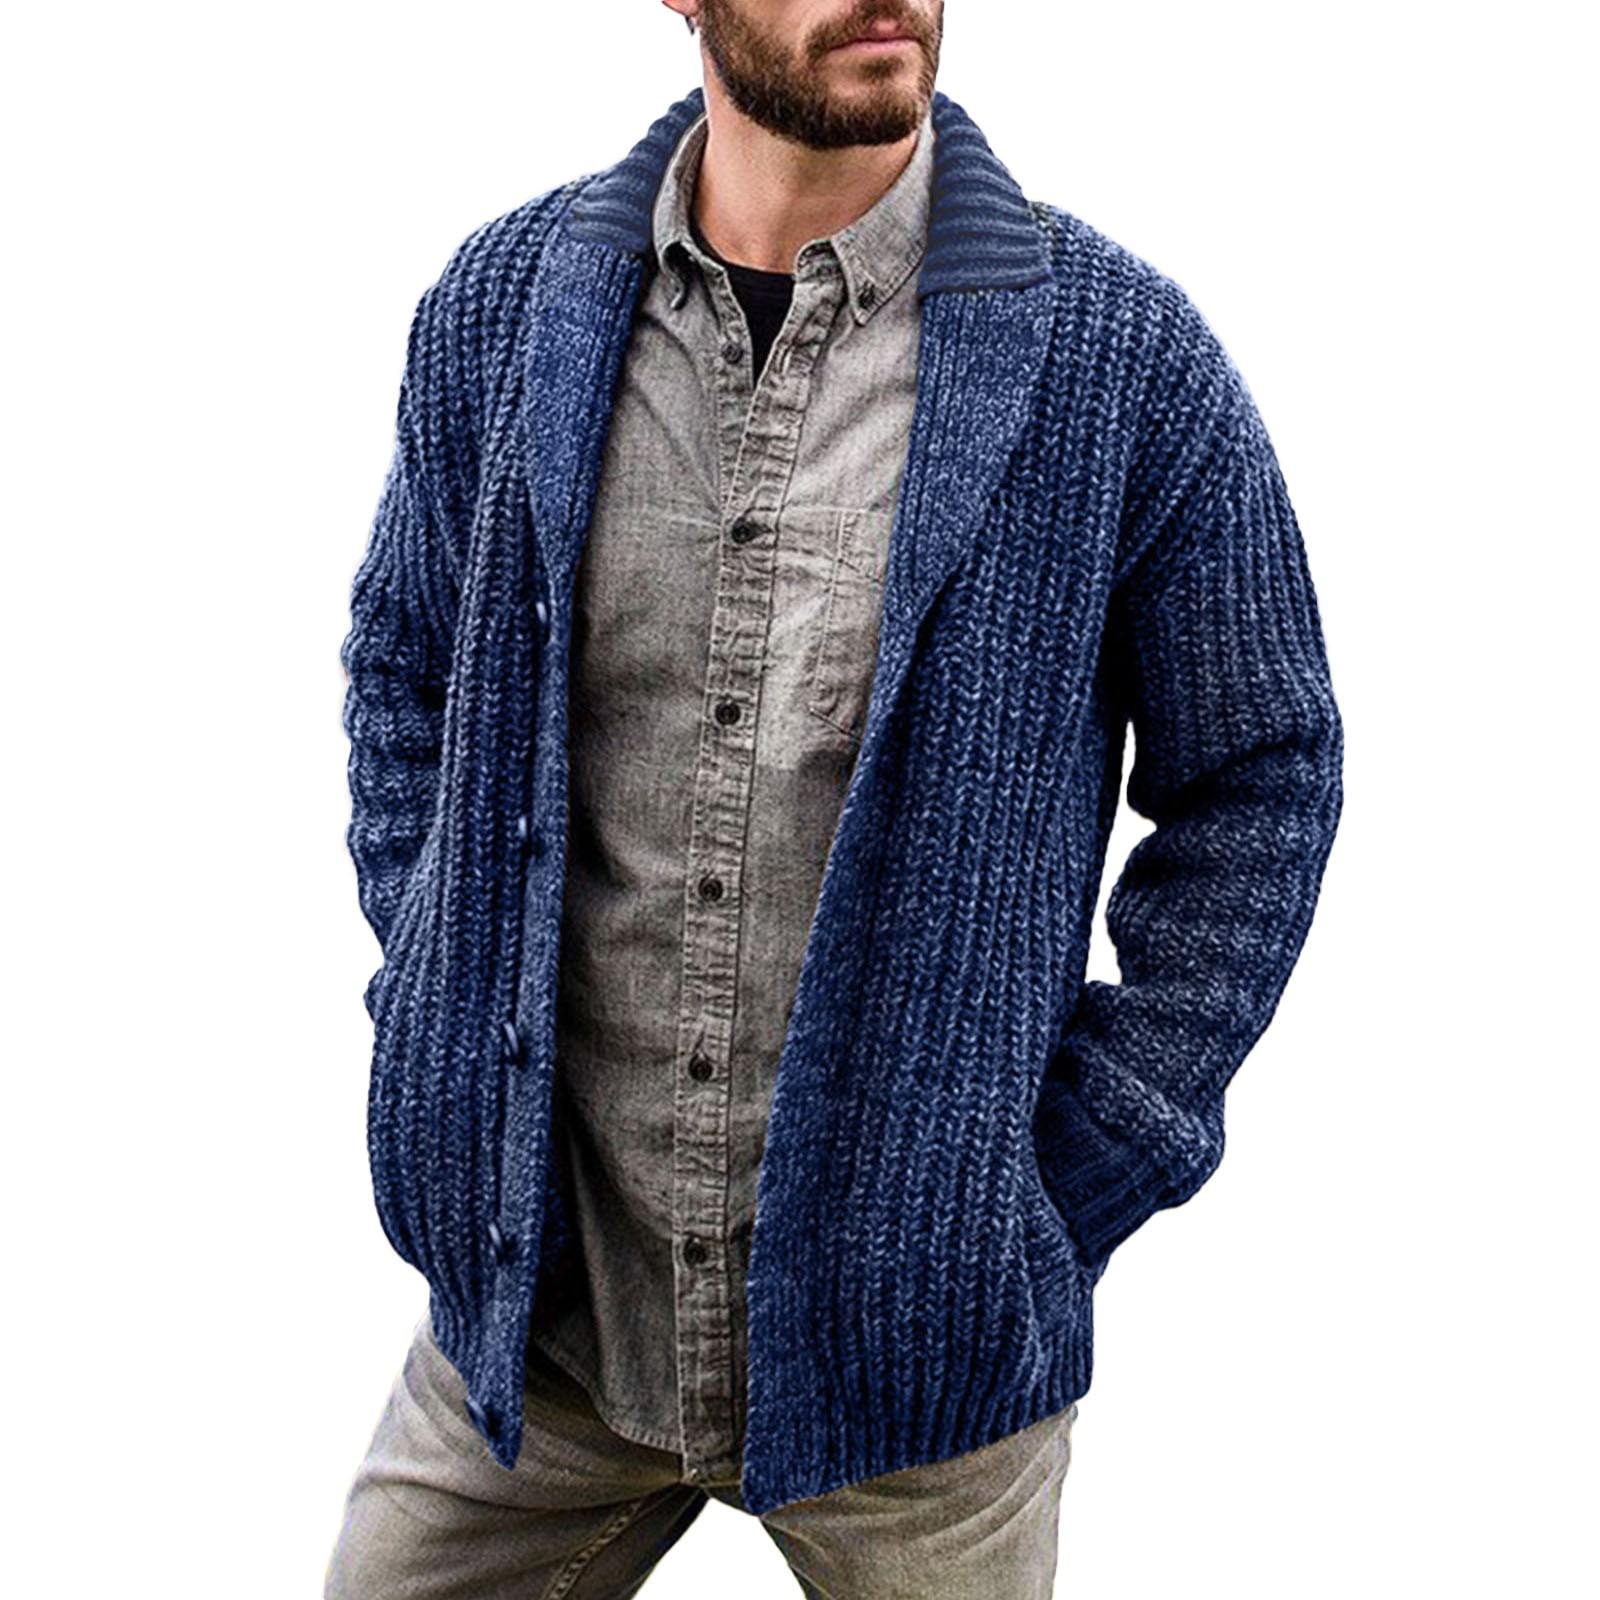 Knitted Sweater Mens Cable Knit Cardigan Sweater Shawl Collar Loose Fit ...